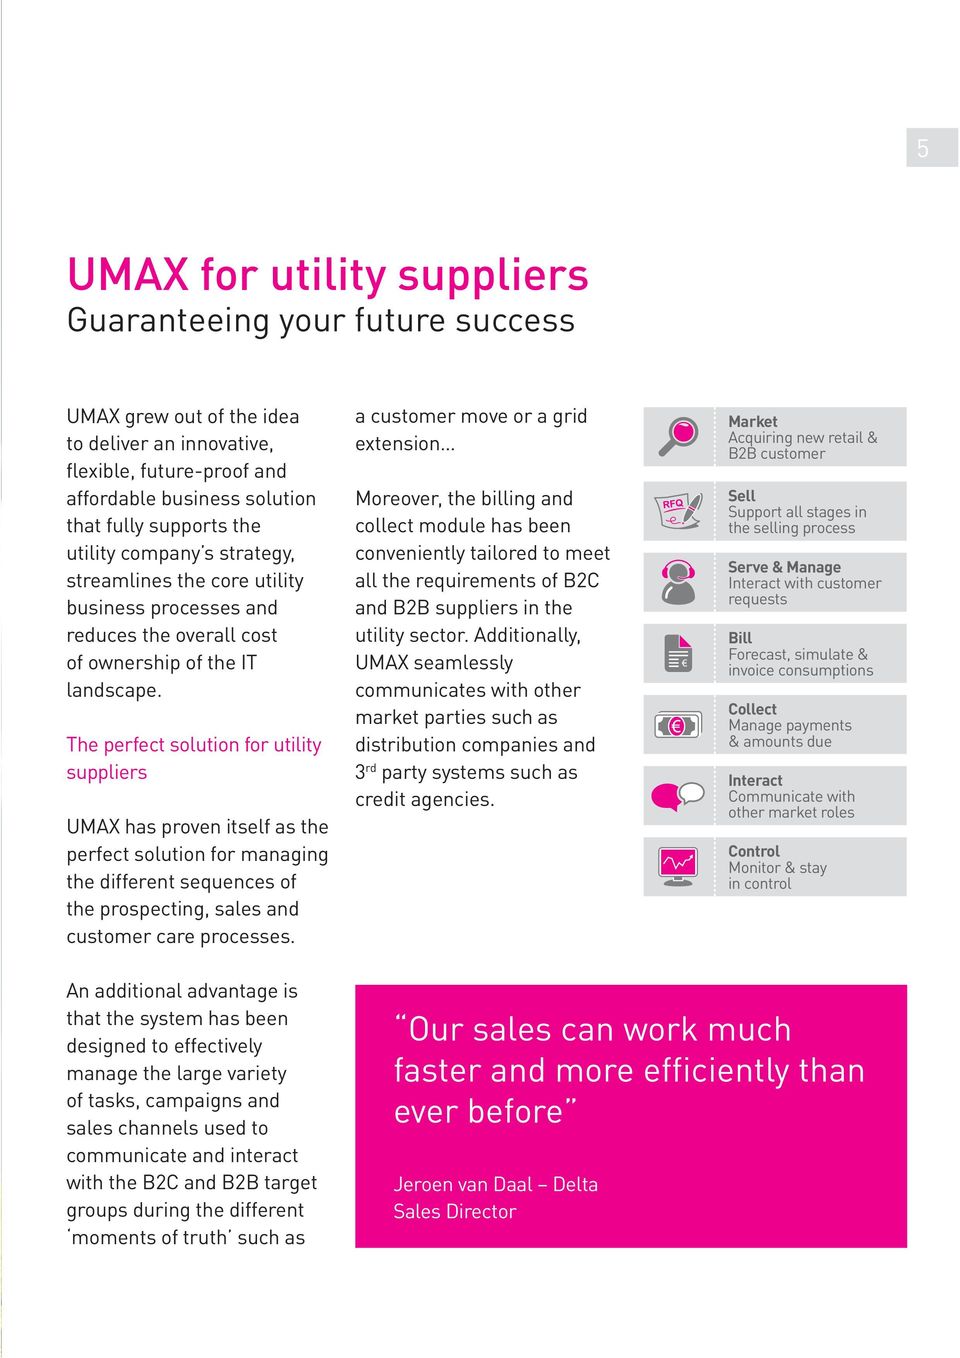 The perfect solution for utility suppliers UMAX has proven itself as the perfect solution for managing the prospecting, sales and customer care processes.